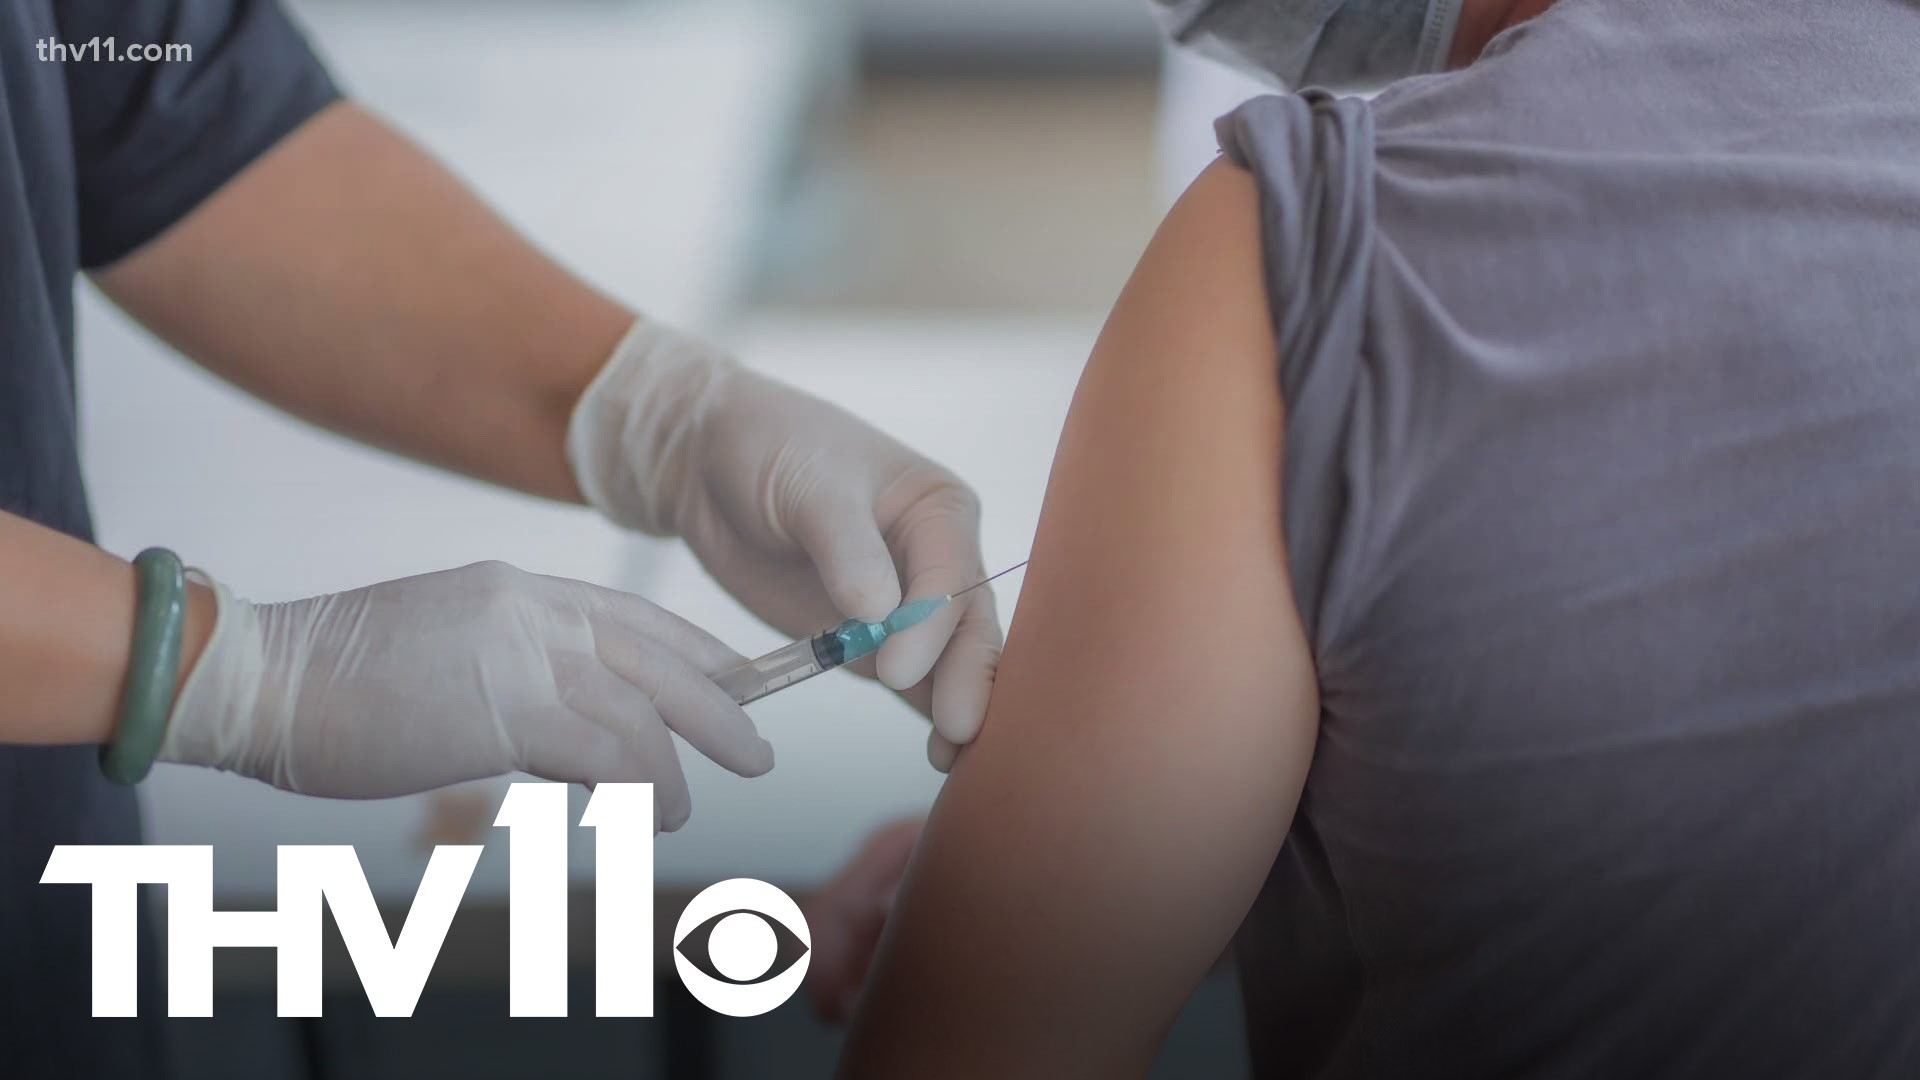 With the virus spreading so quickly and the shot literally days away, how eager are you to get the vaccine? Some aren't so confident.